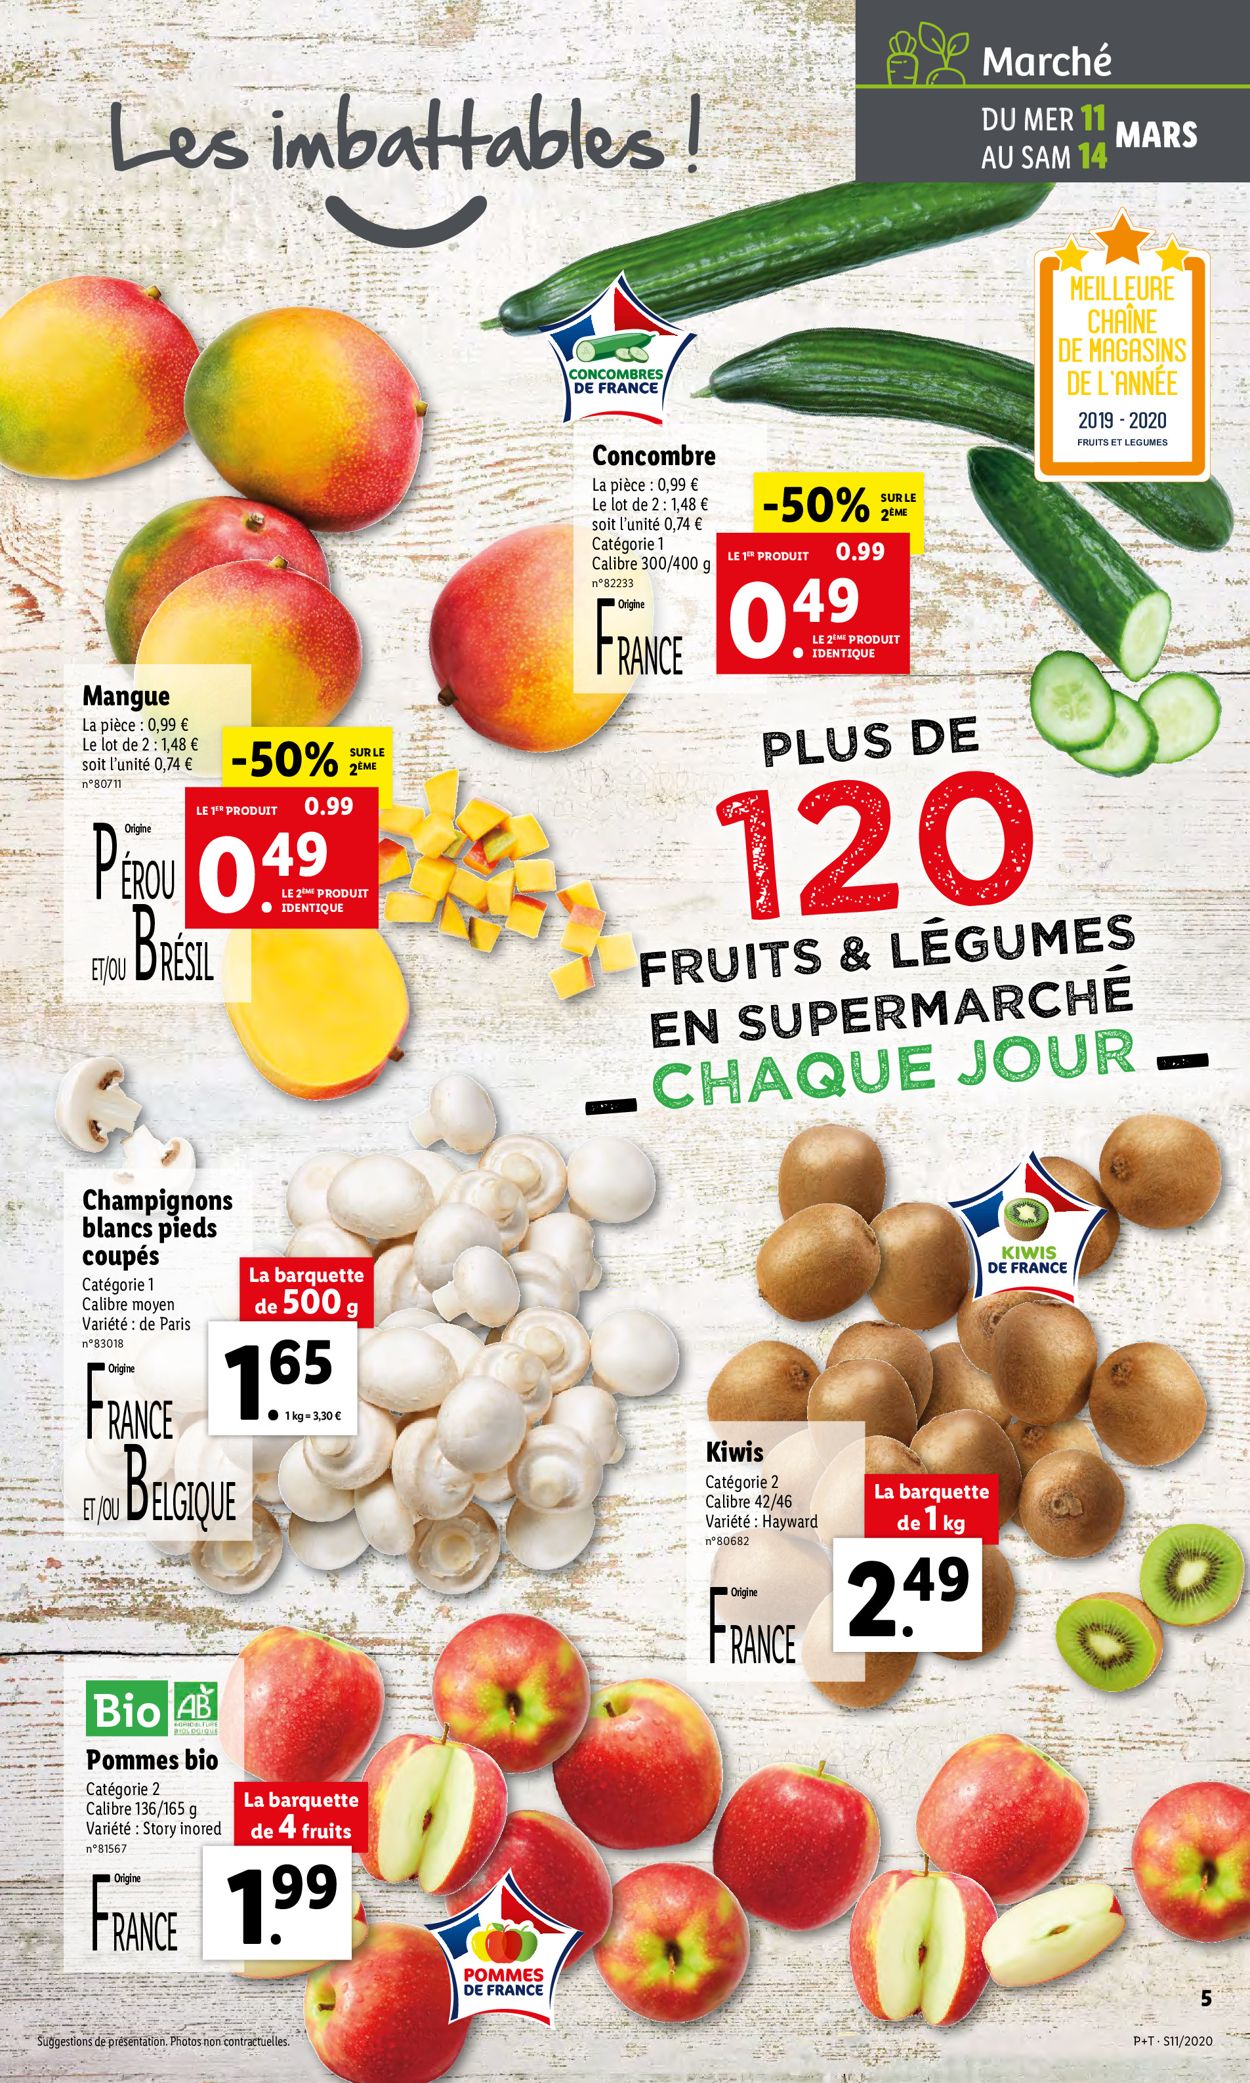 Lidl Catalogue - 11.03-17.03.2020 (Page 5)